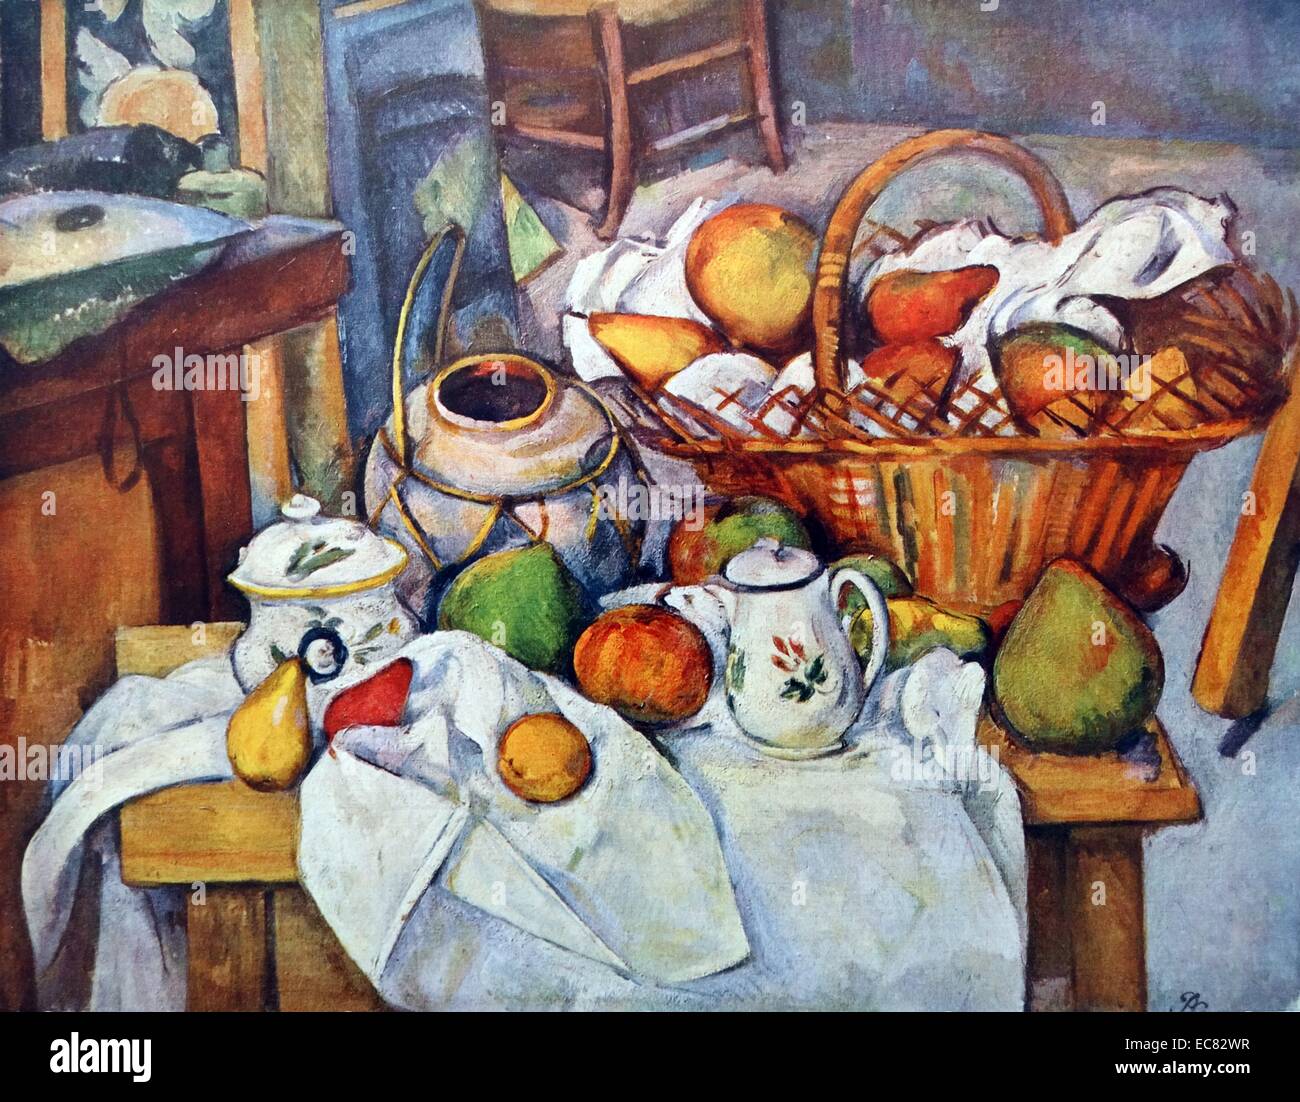 Still life with Fruit Basket by Paul Cézanne (1839-1906) French artist and  Post-Impressionist painter. Dated 1886 Stock Photo - Alamy